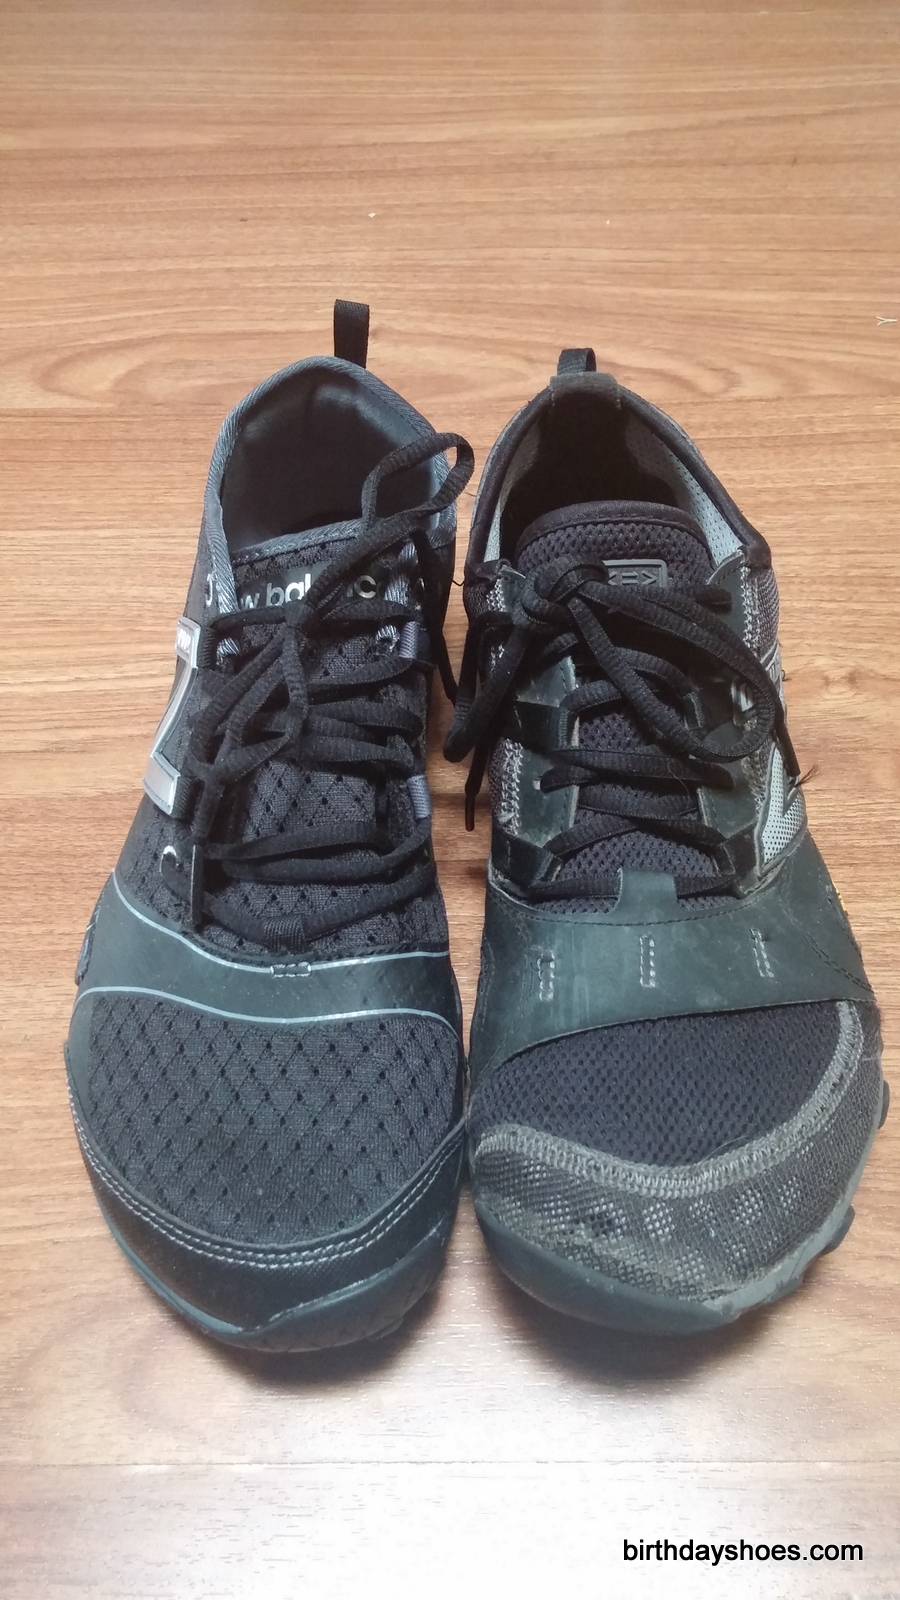 New MT10V3 Review (Minimus Trail) Birthday Shoes - Toe Shoes, Barefoot or Minimalist Shoes, and Vibram FiveFingers Reviews, News, Forums